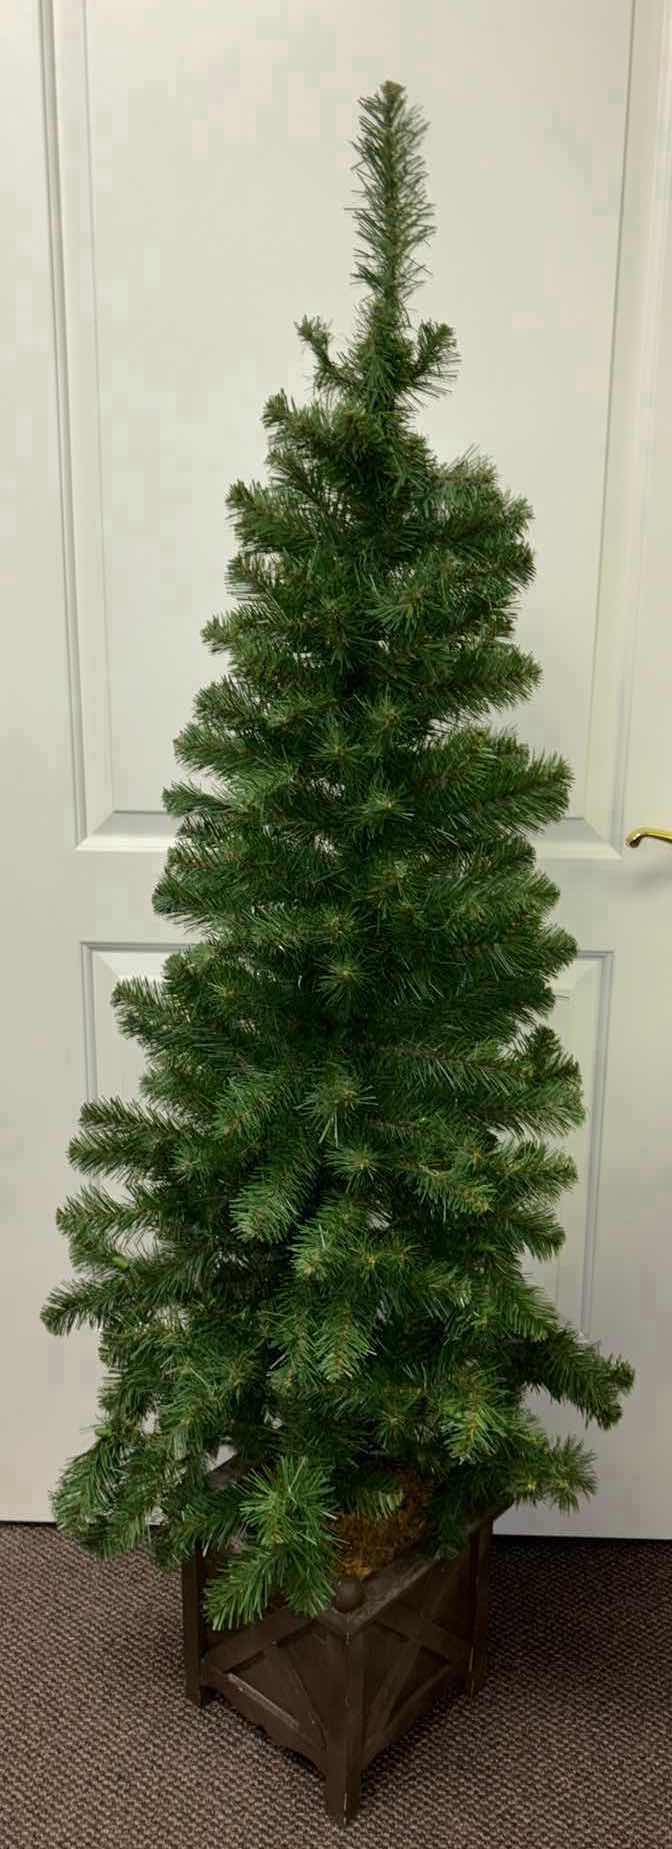 Photo 1 of 5 FT ARTIFICIAL CHRISTMAS TREE IN A WOODEN TREE COLLAR BOX